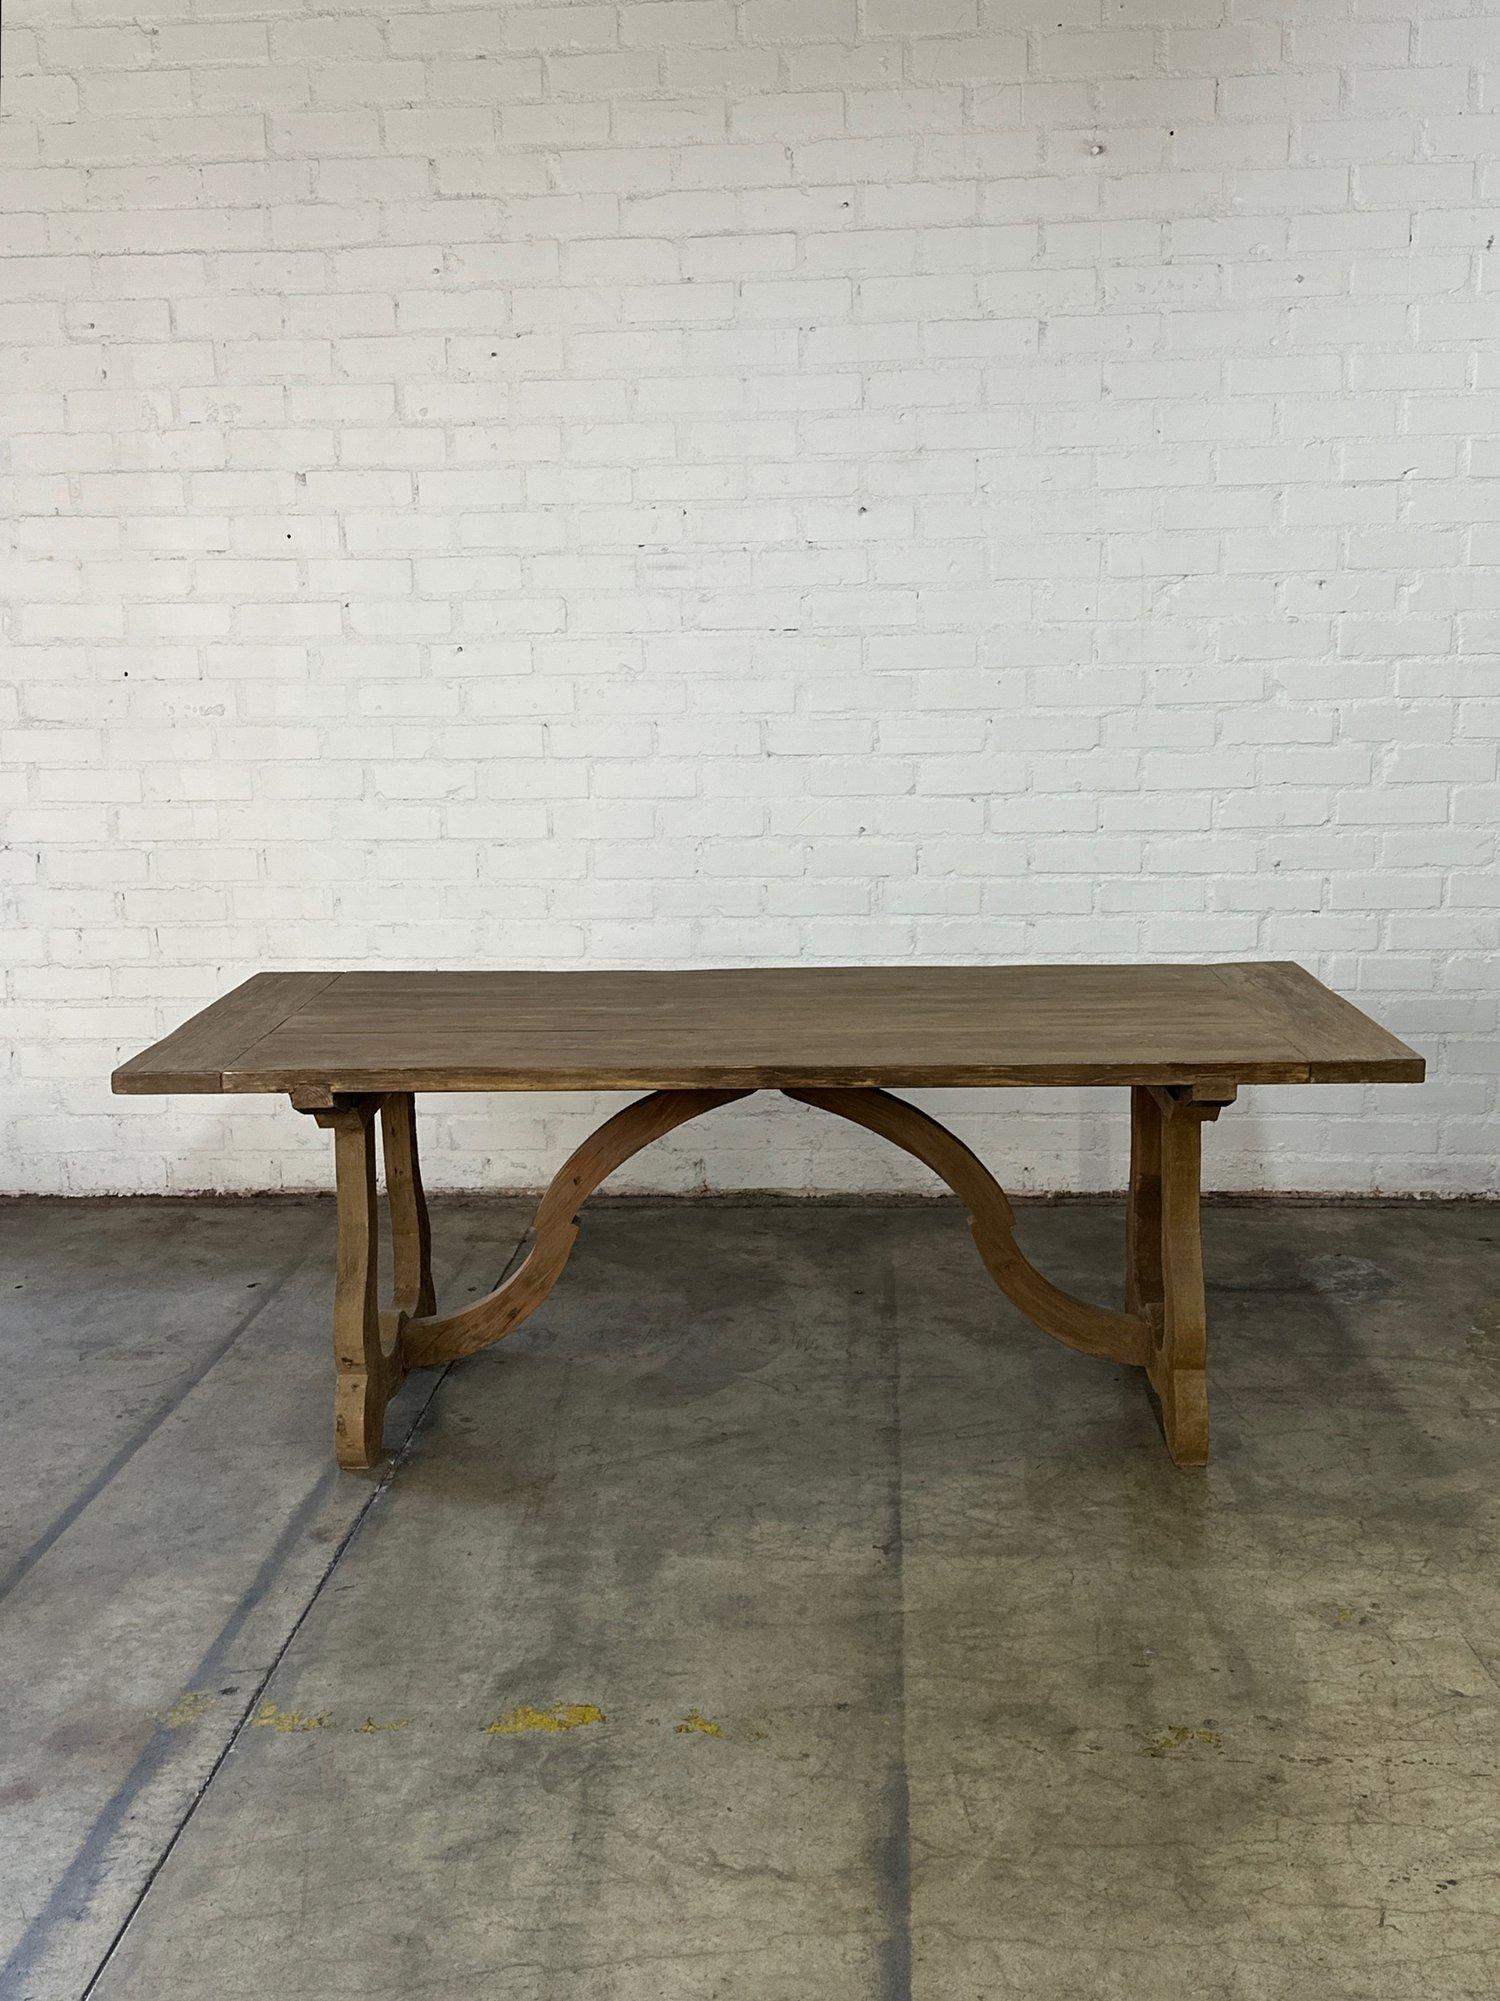 W84 D35 H30.5 KC28

Vintage Reclaimed Pine Dining Table in great condition. Item has been inspected and fortified in by in house artisans. Table is strucurally sound and sturdy, table also has an added topcoat to help durabilty.